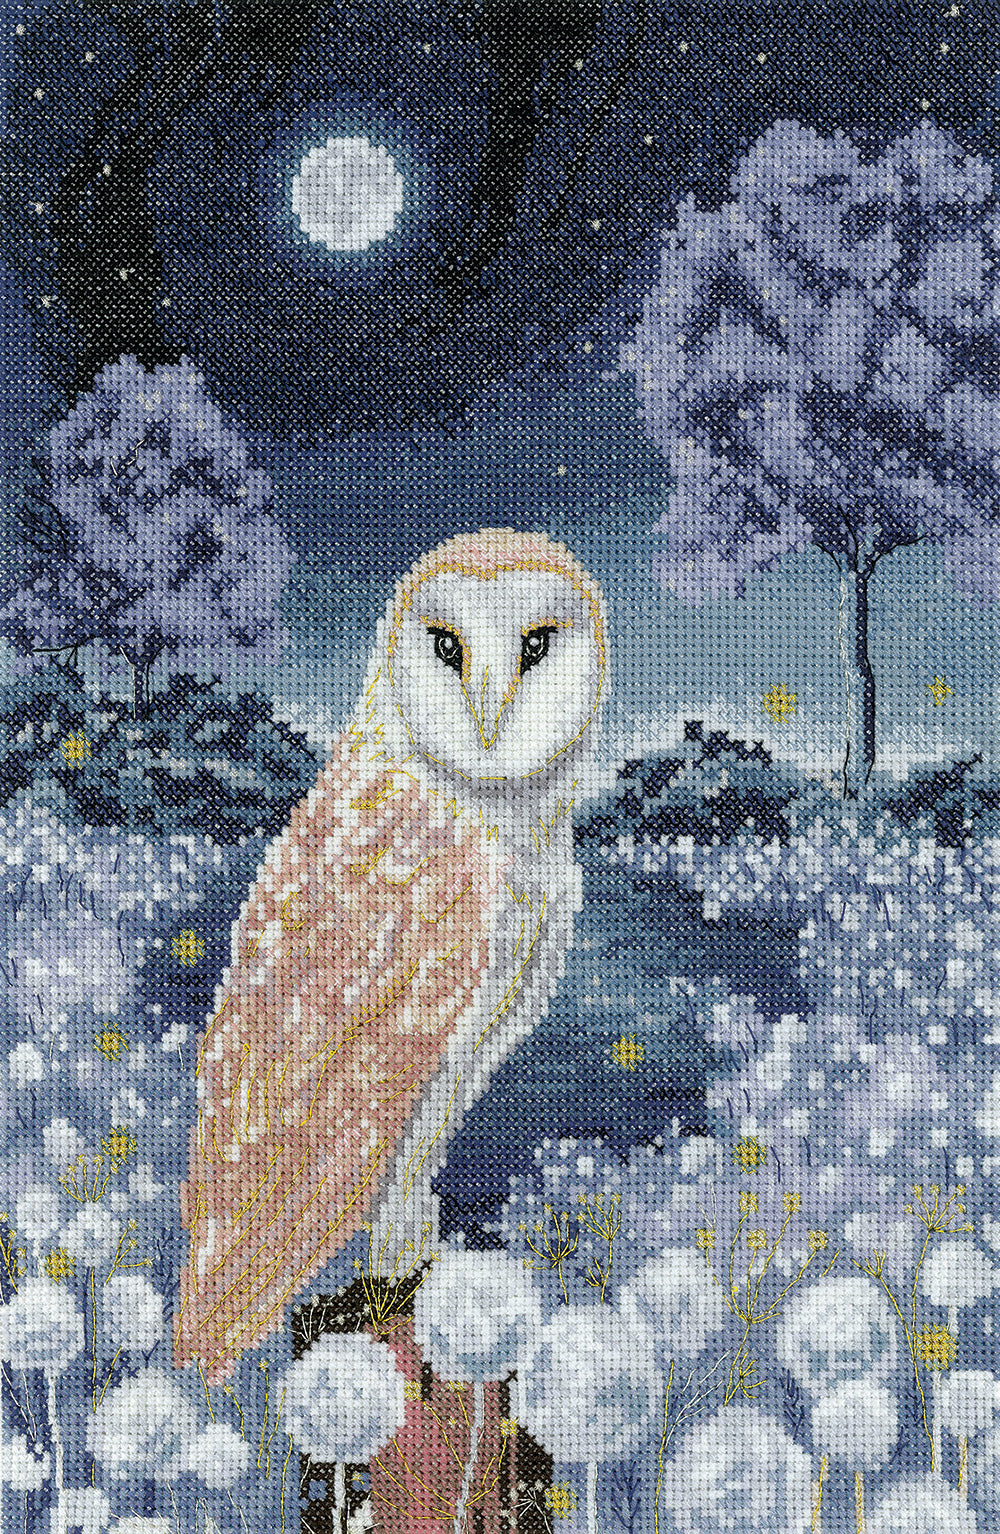 Barn Owl at Night - Counted Cross Stitch Embroidery